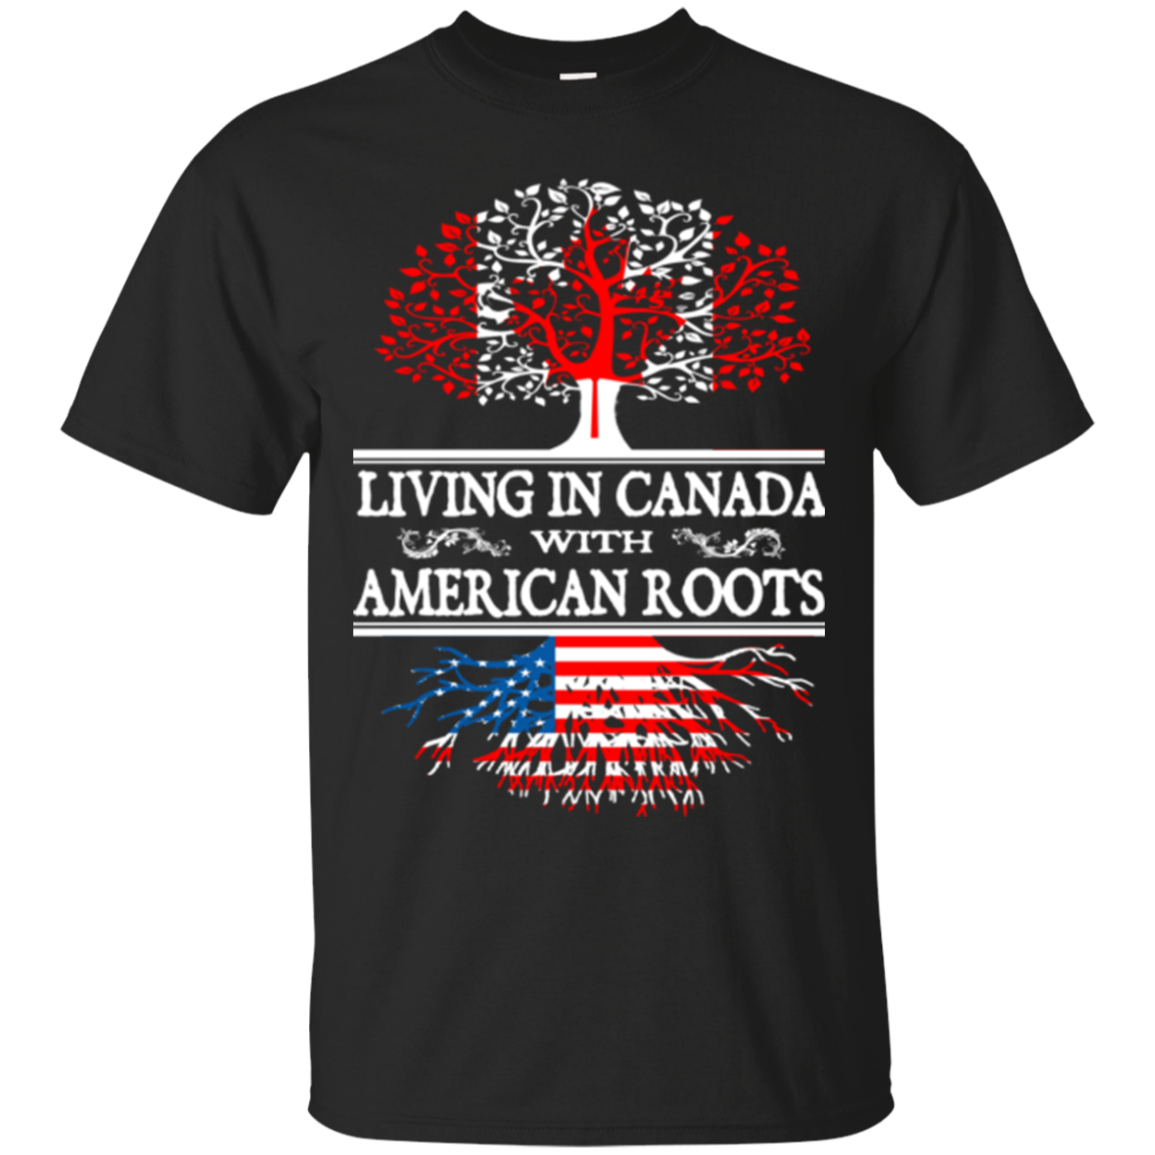 Canada American Roots Shirts Living In Canada With American Roots ...